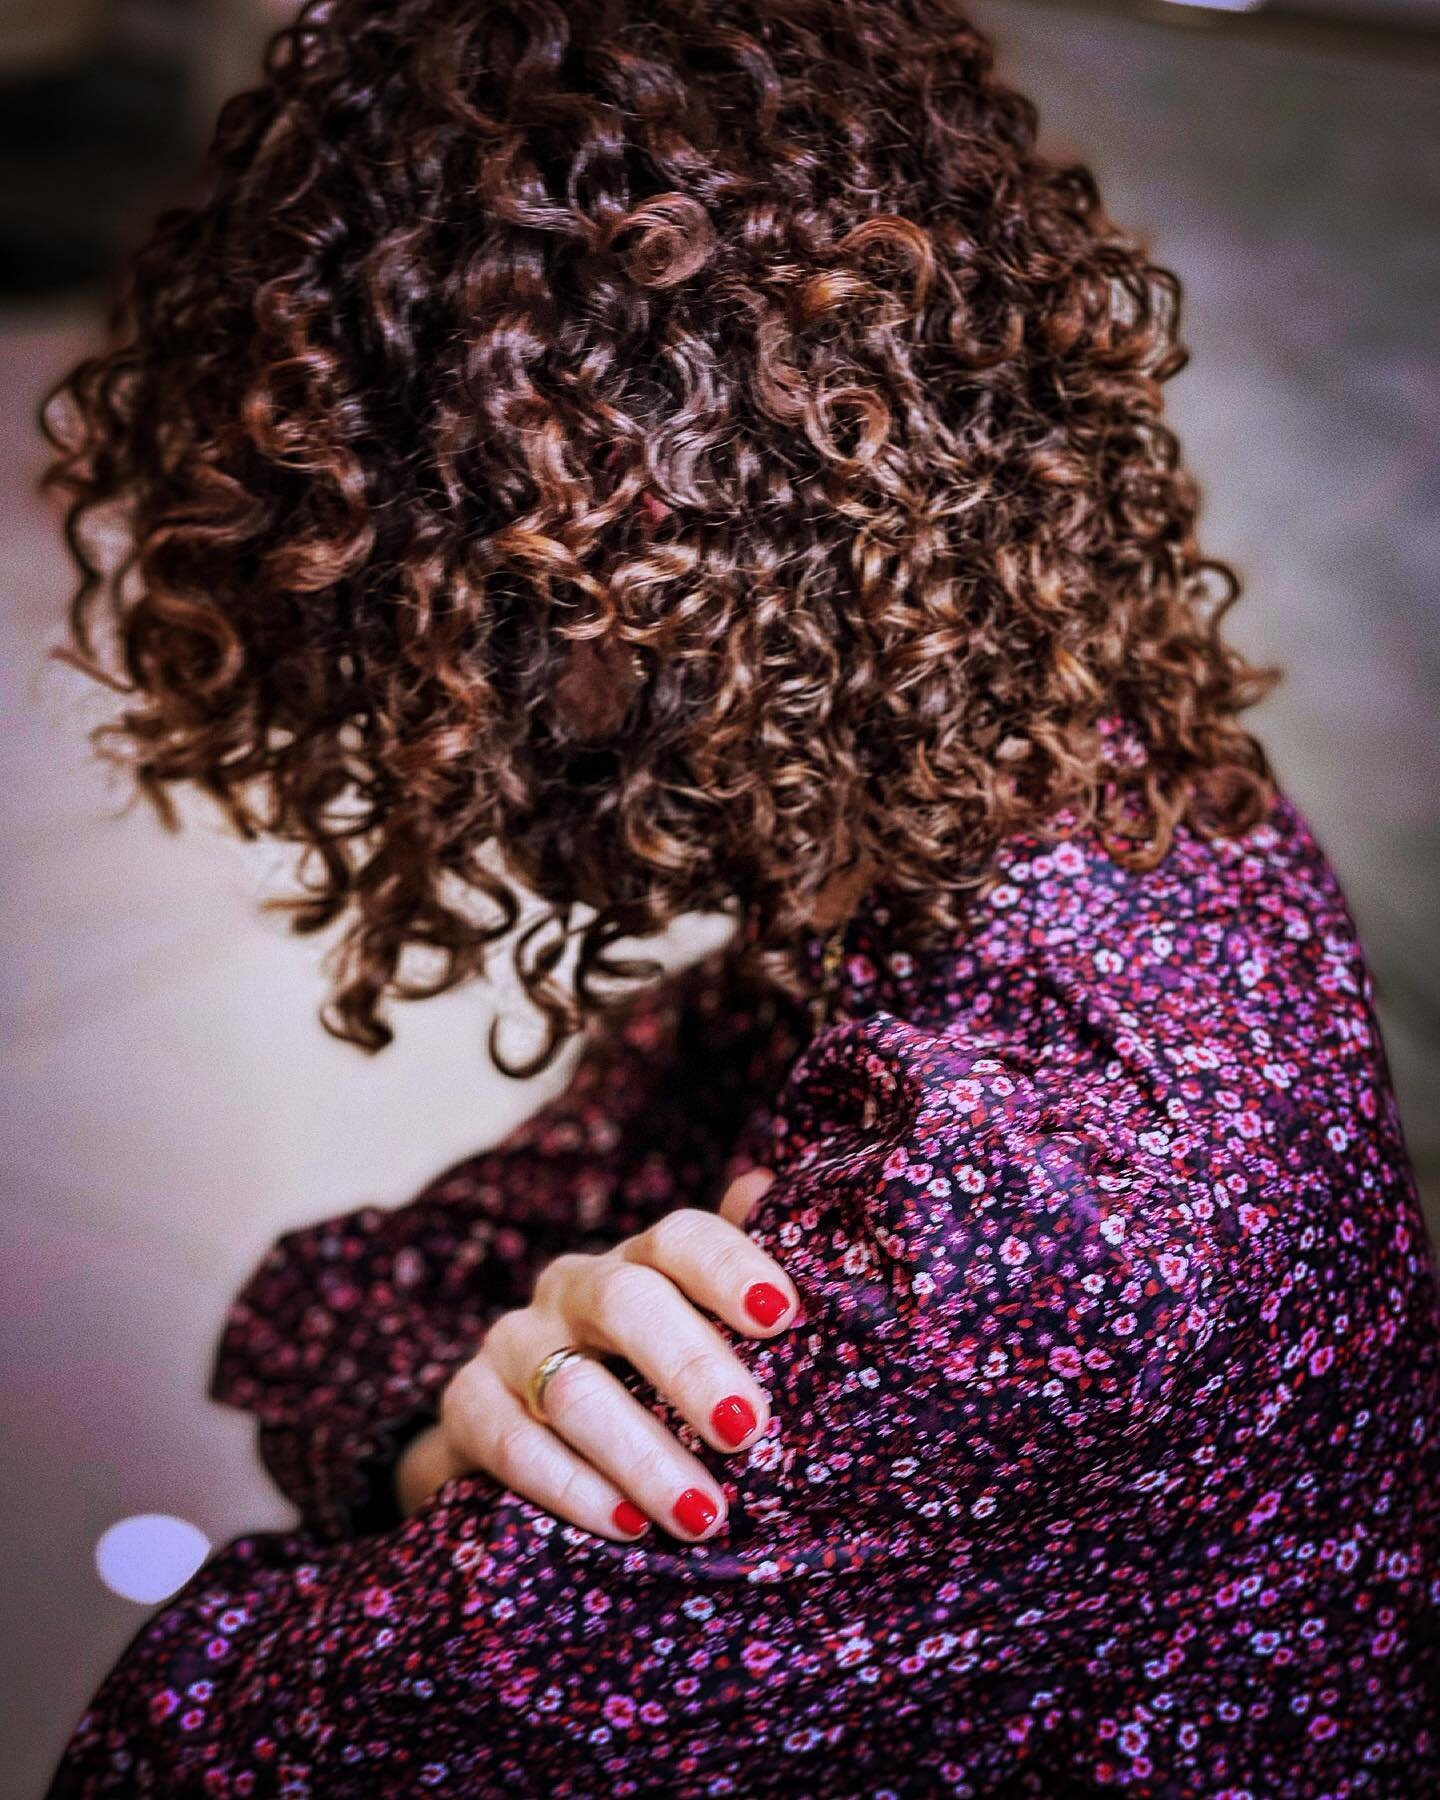 CURLY Queens-

Don&rsquo;t hush the process. 
Allow Yourself to Grow at your Own Pace.
stop Comparing your Life yo What&rsquo; other People are ACHIEVING! 

#color&amp;curlcutbyTeoSorce# 
#curlyhairstyles#drycuttingspecialist#drycutting#devacurls#lep